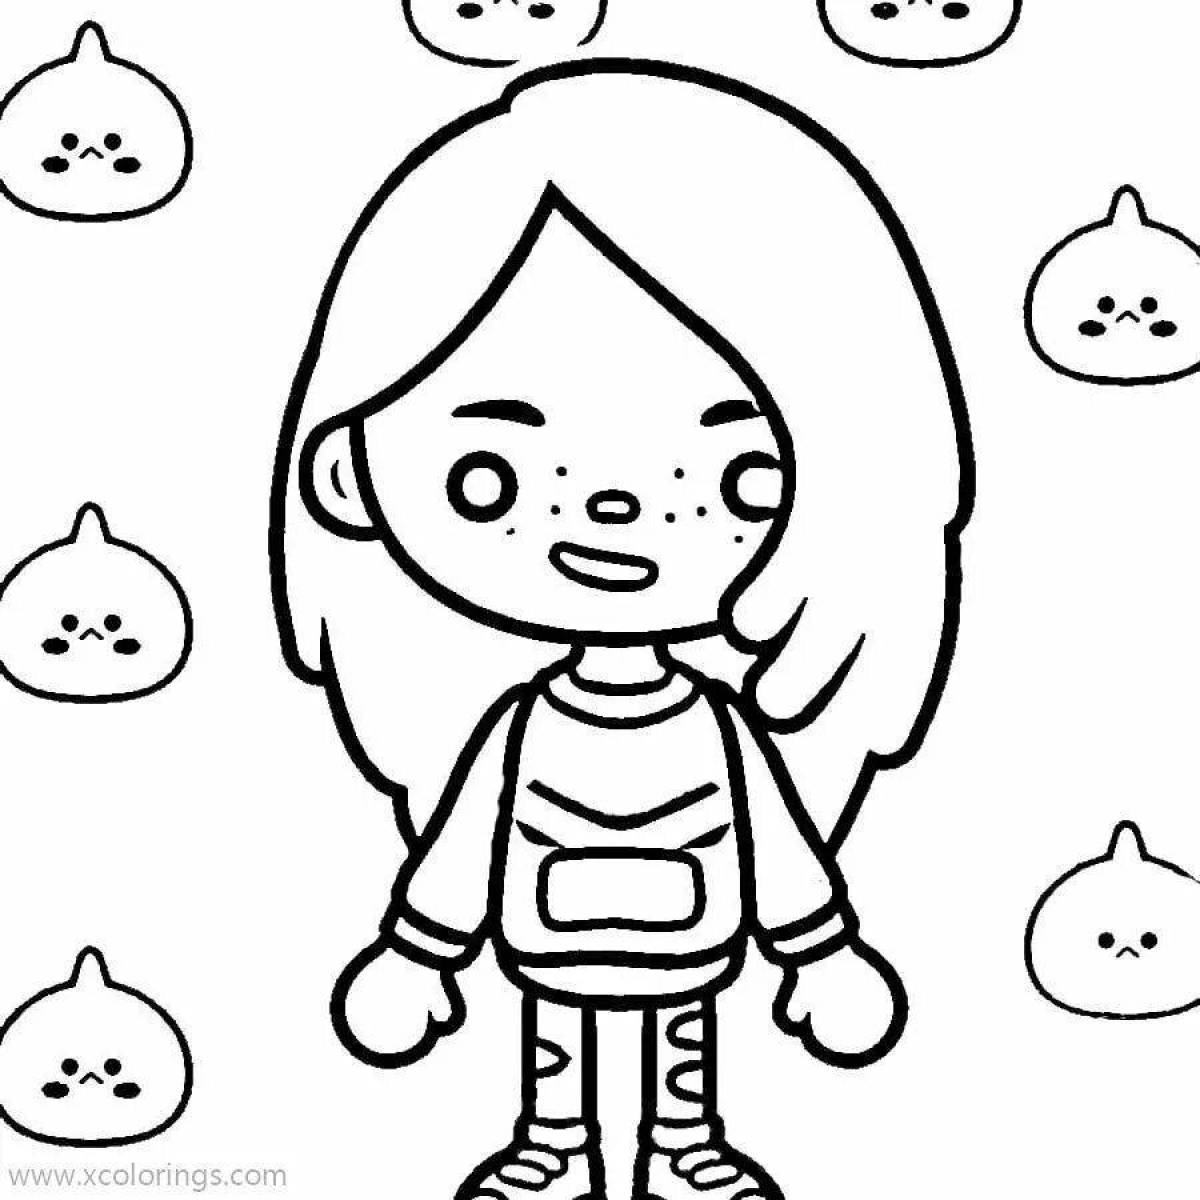 Amazing toca world coloring page